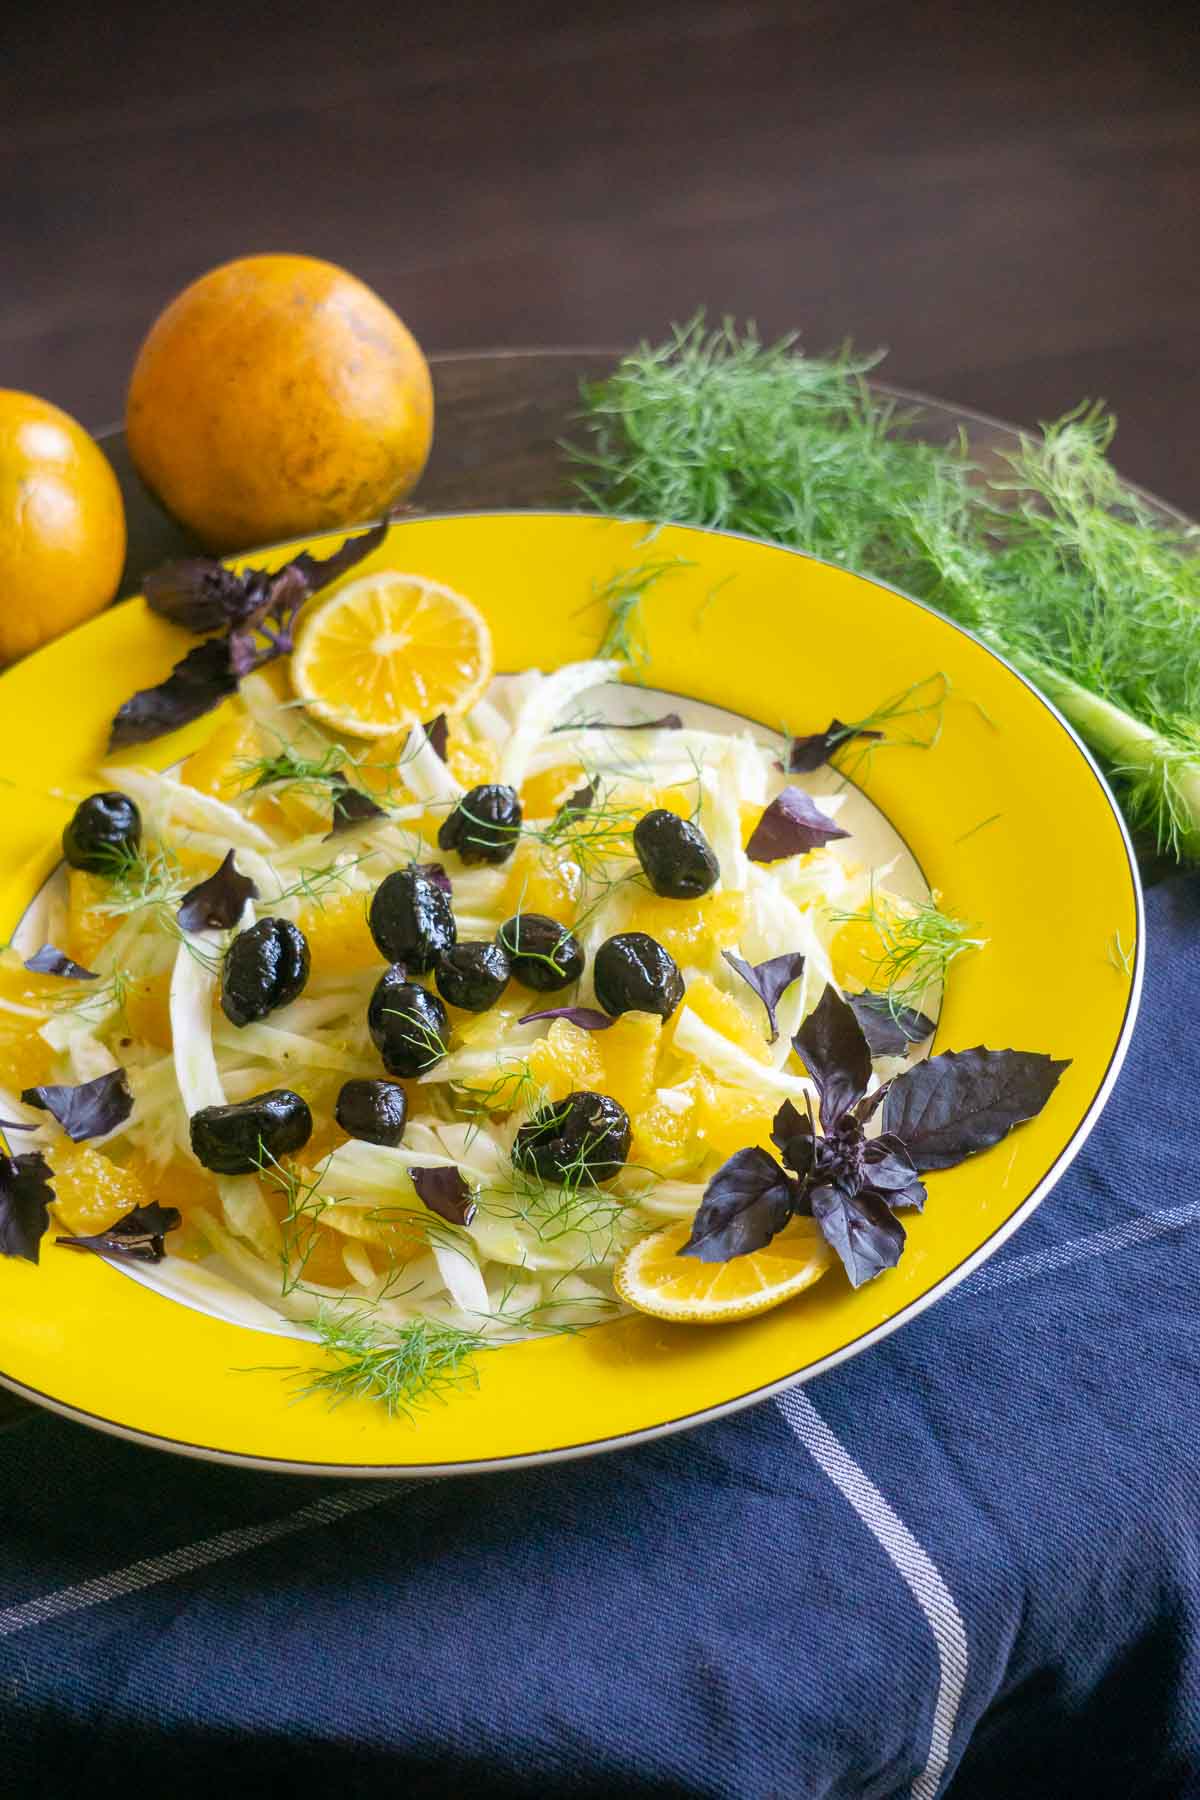 fennel orange and olive salad on yellow plate